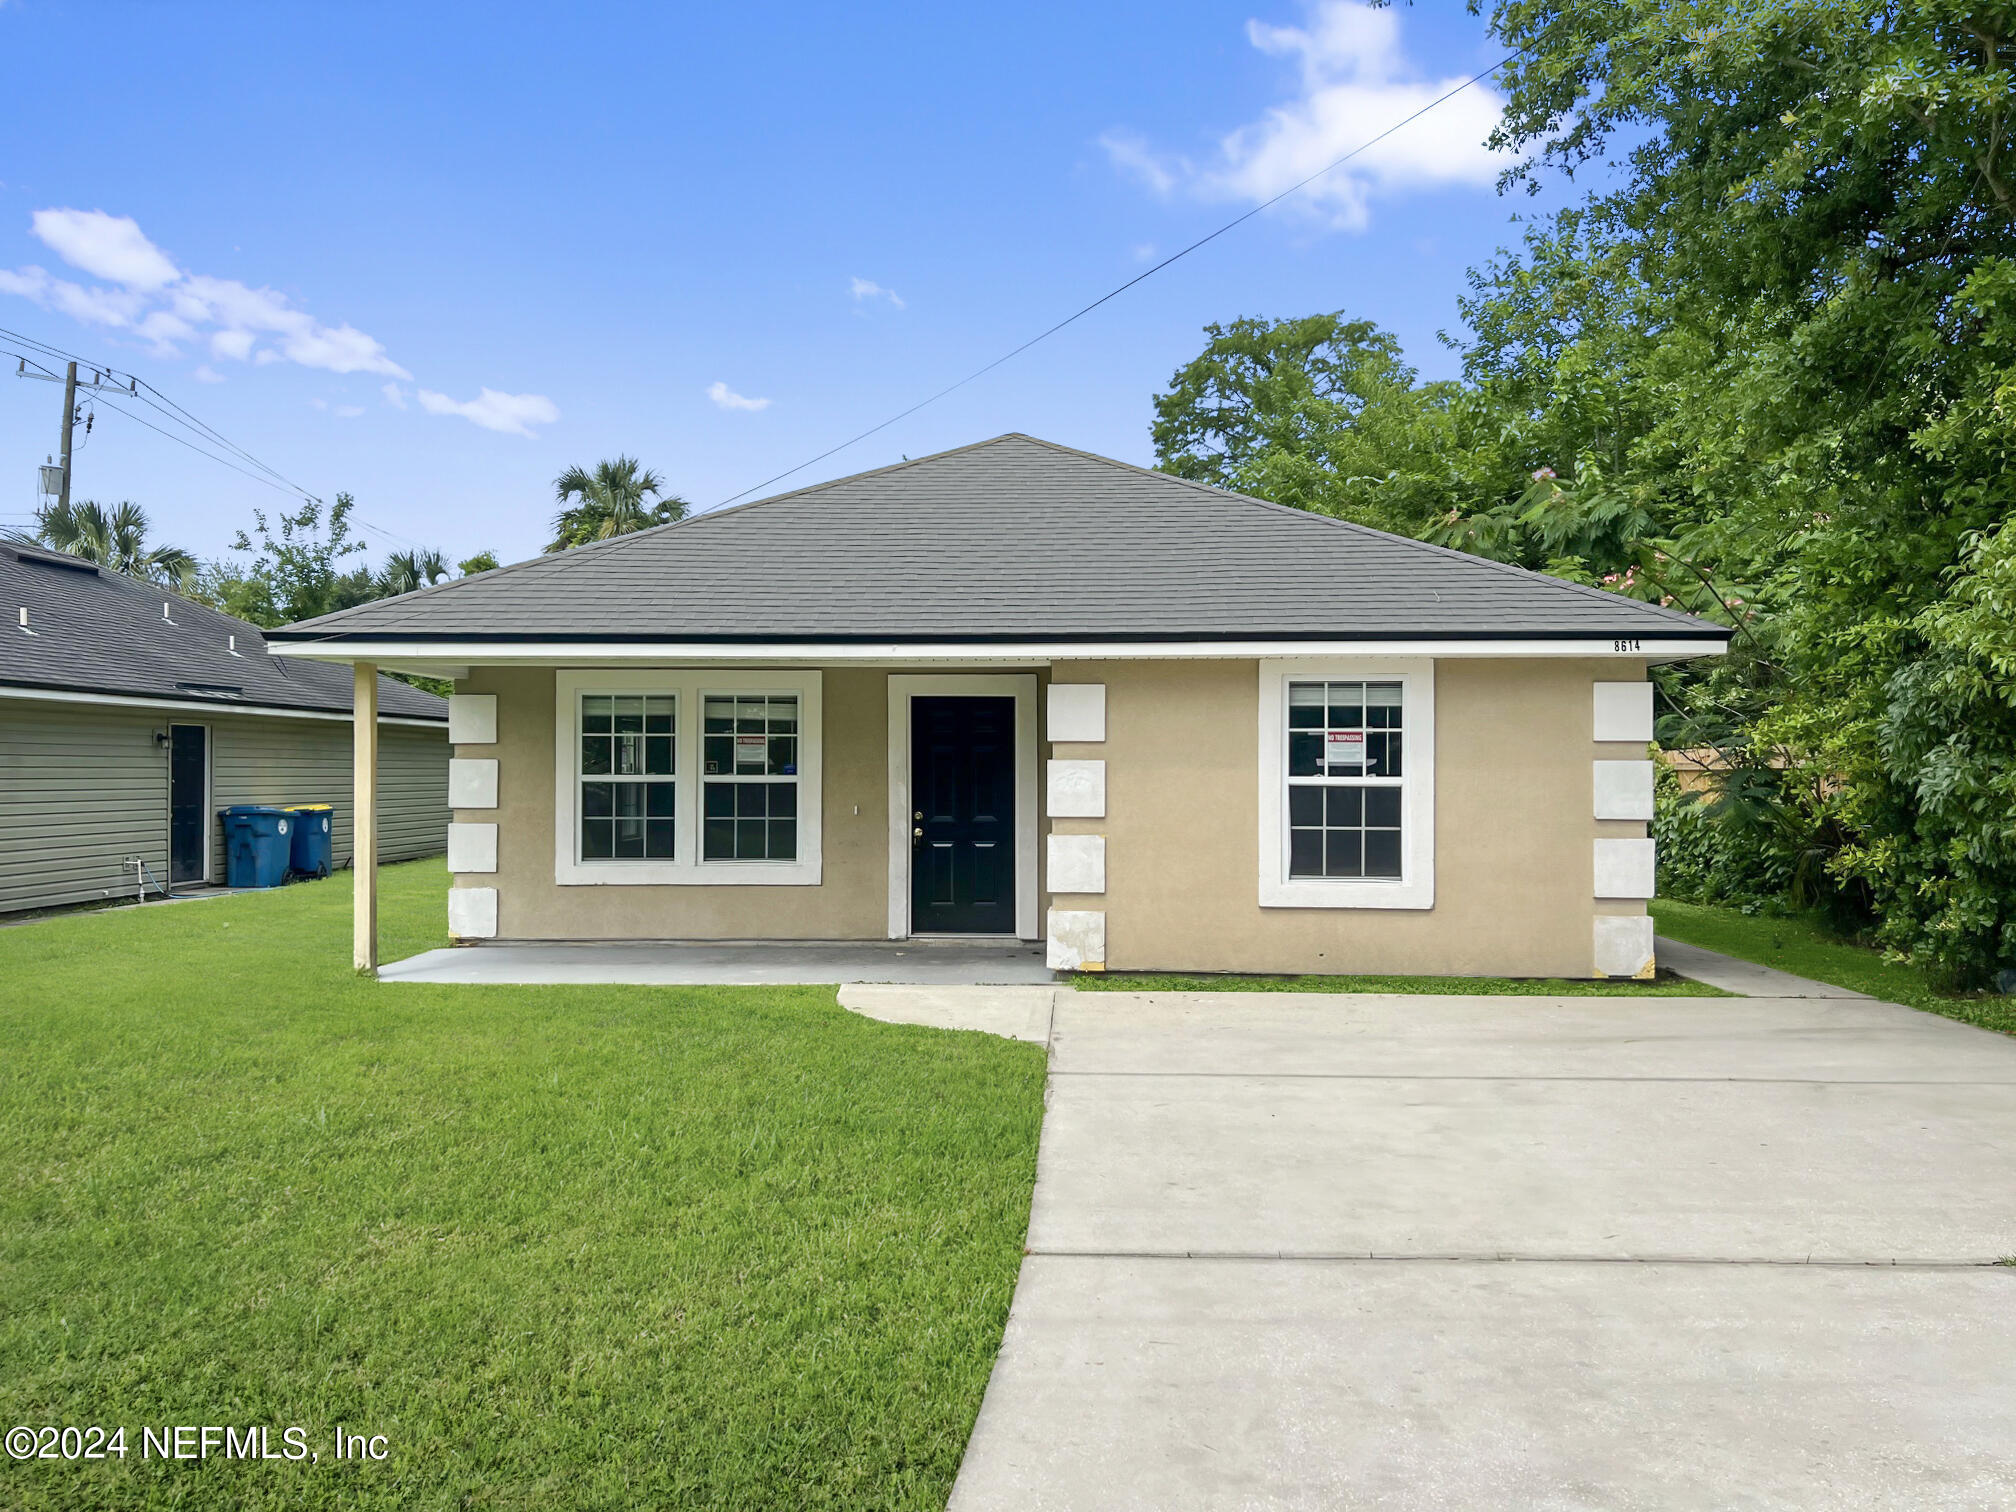 Jacksonville, FL home for sale located at 8614 3rd Avenue, Jacksonville, FL 32208